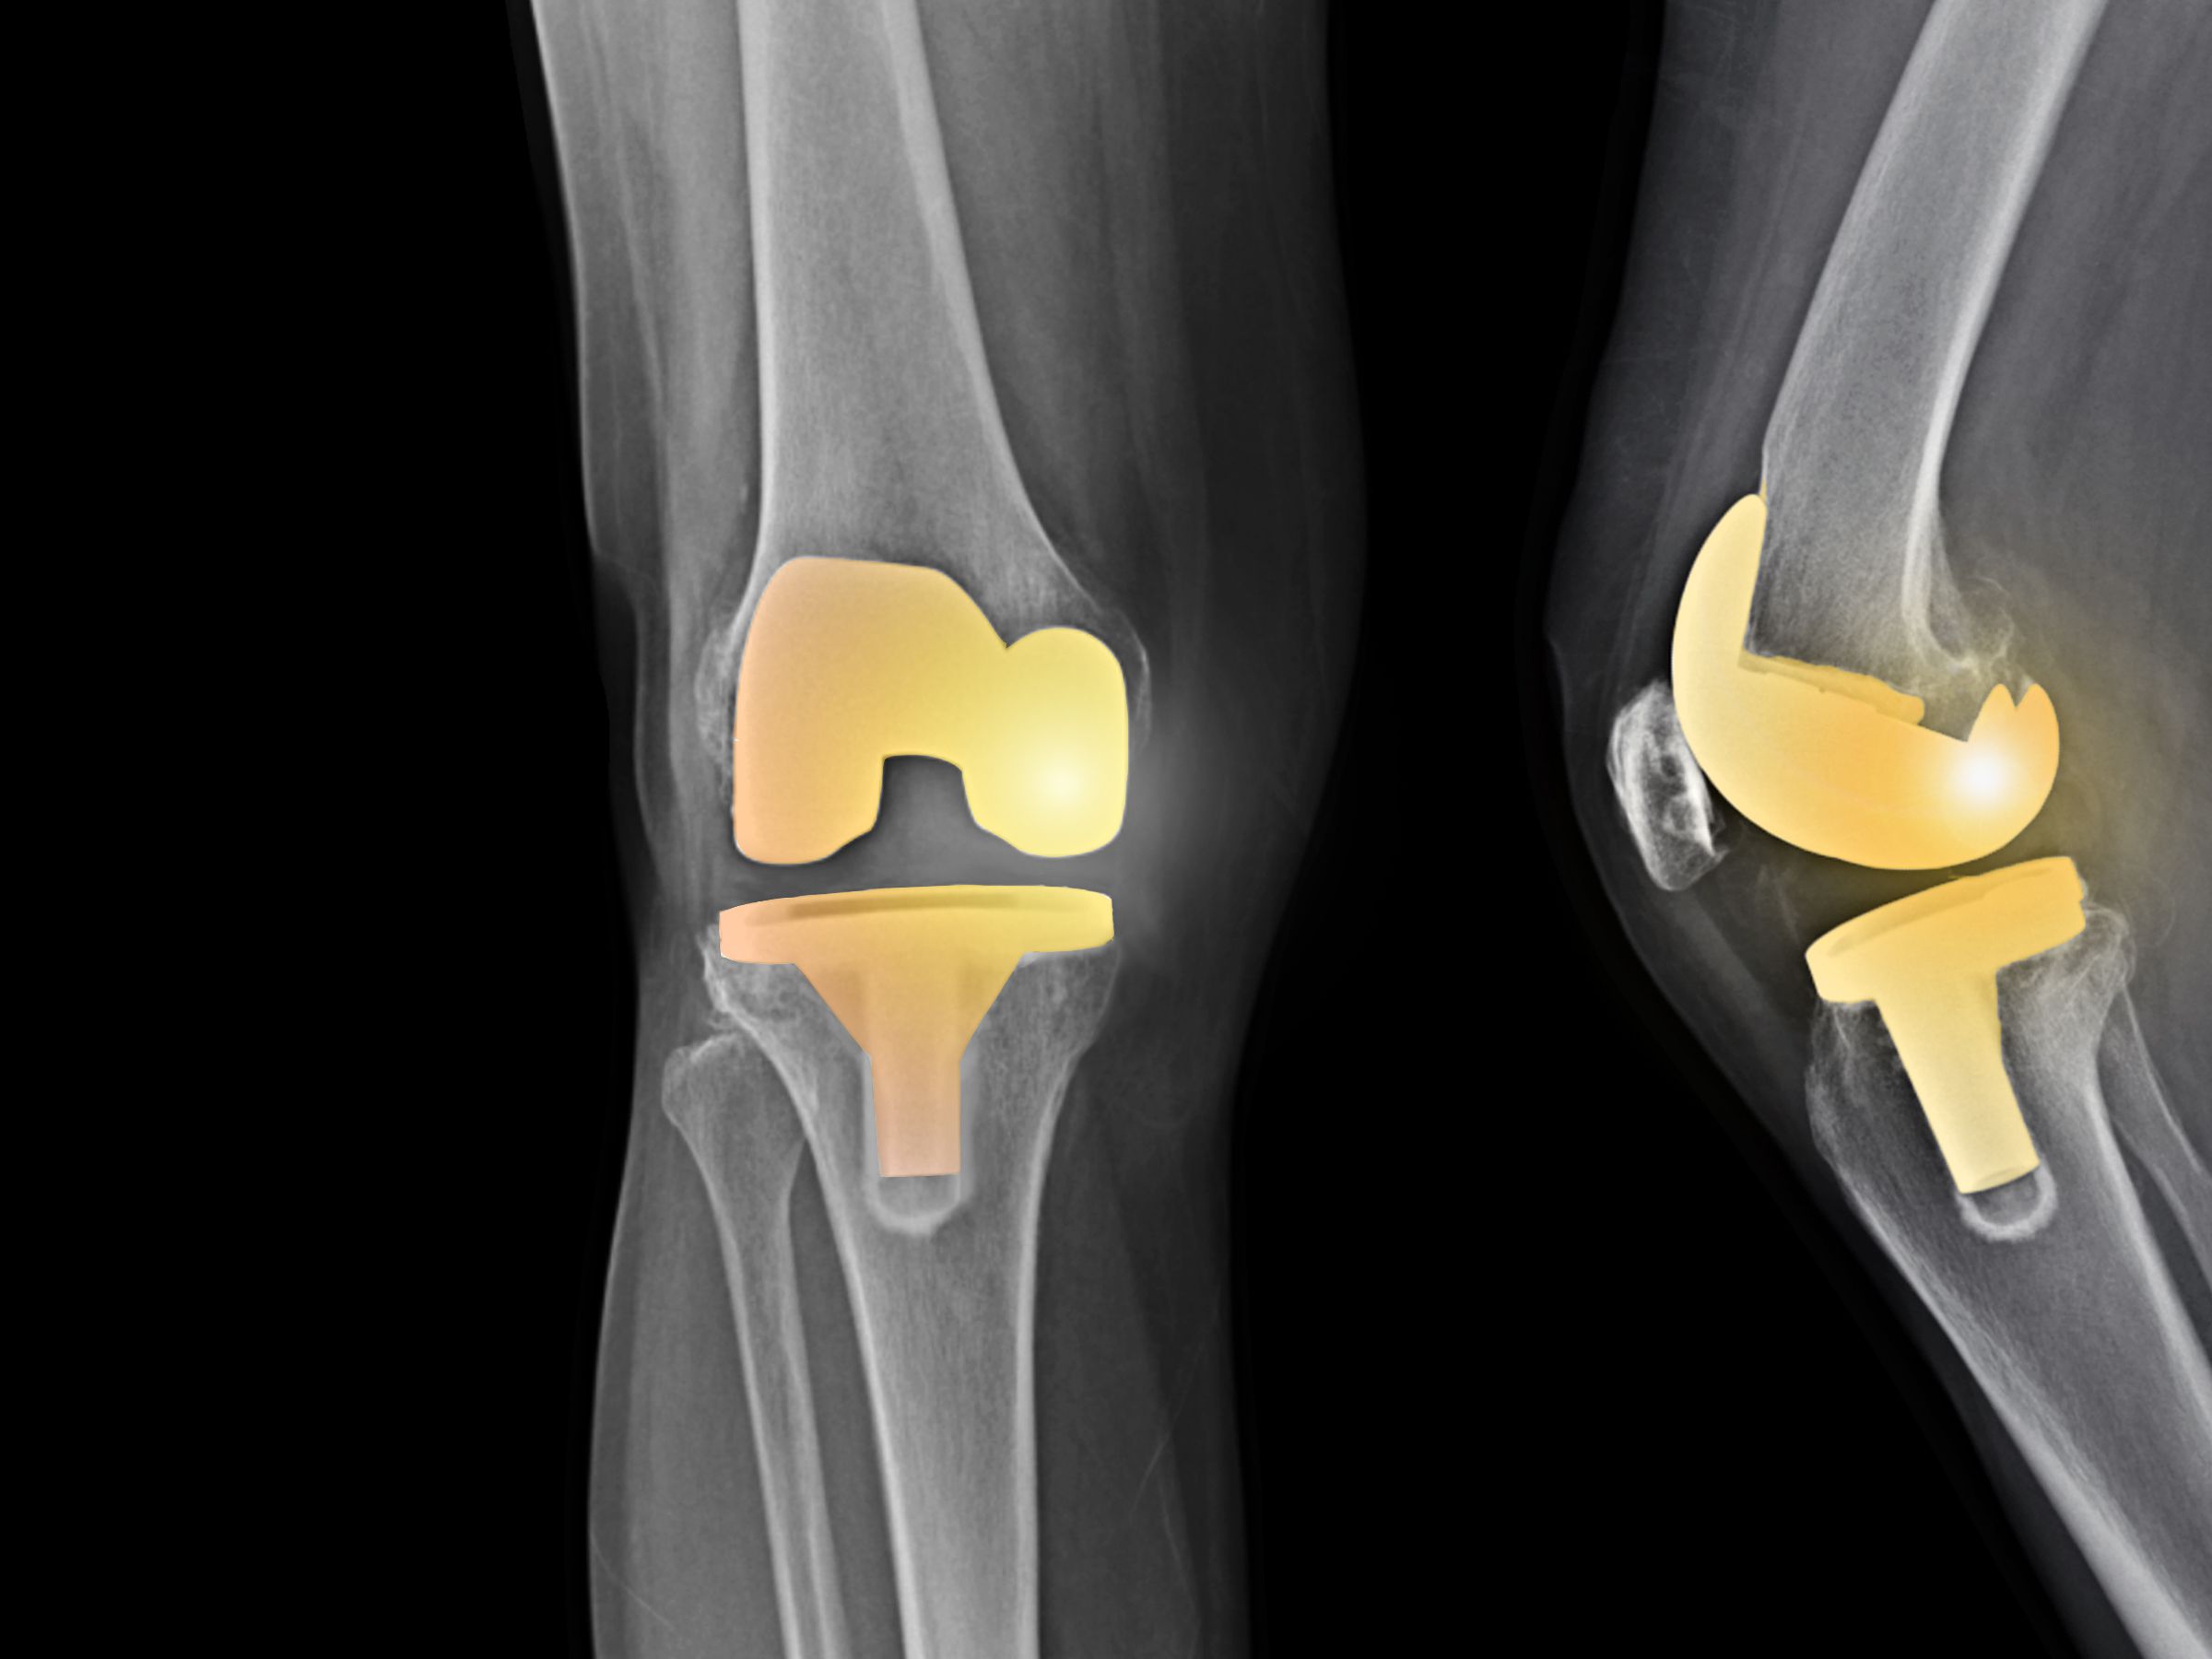 Knee Replacement Surgery, Thailand